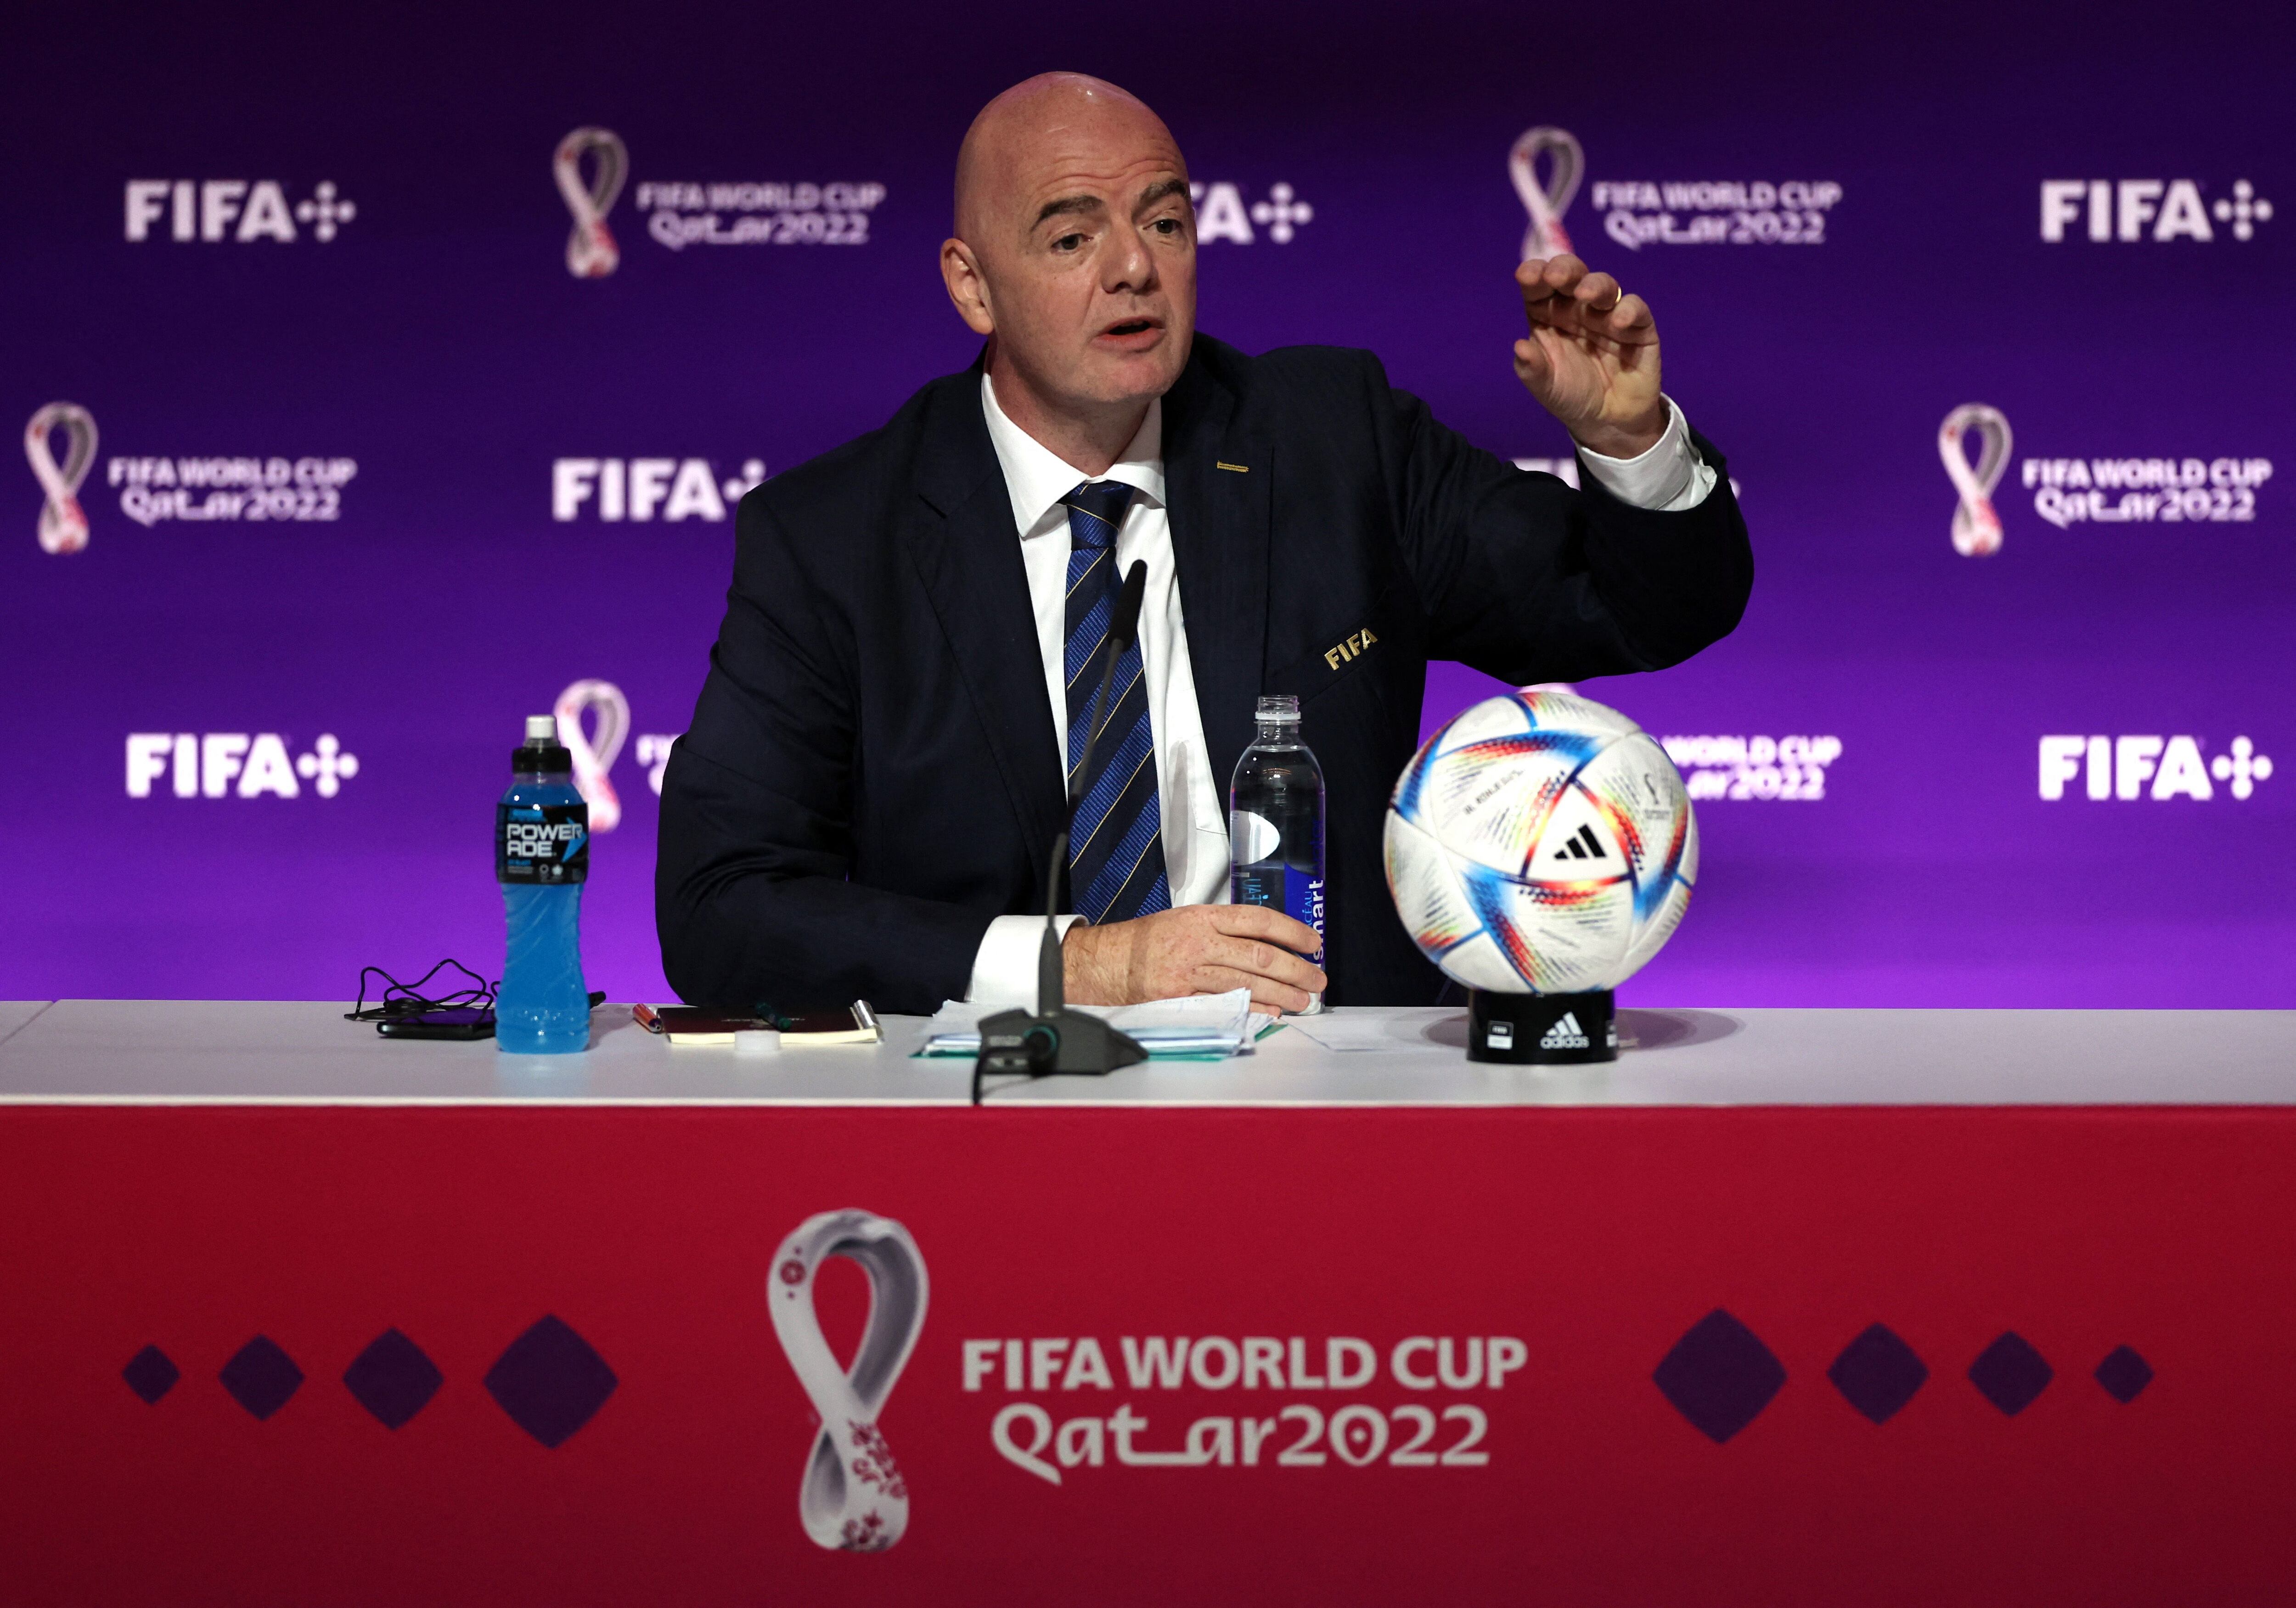 At the Extraordinary FIFA Congress held in Zurich on February 26, 2016, Gianni Infantino was elected as the new president.